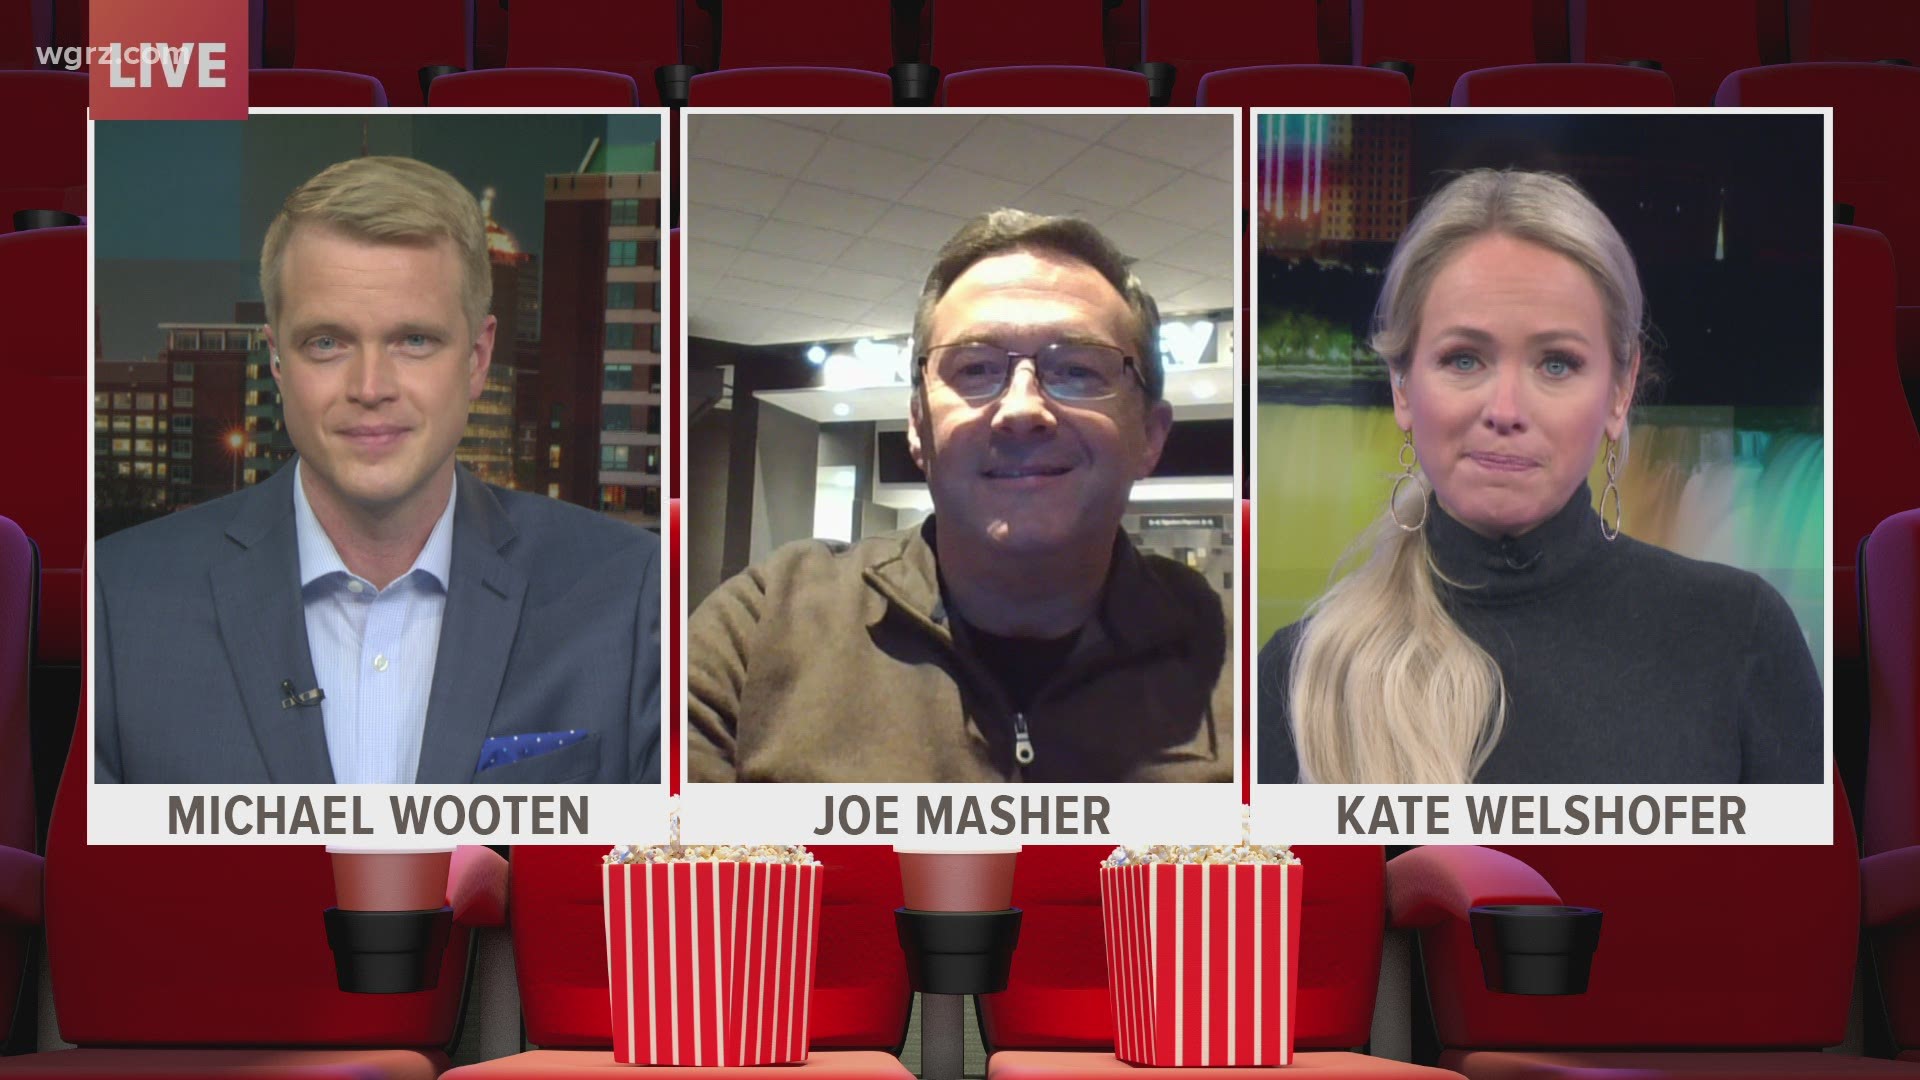 Joe Masher joins our town hall to discuss the Movie Theaters reopening.